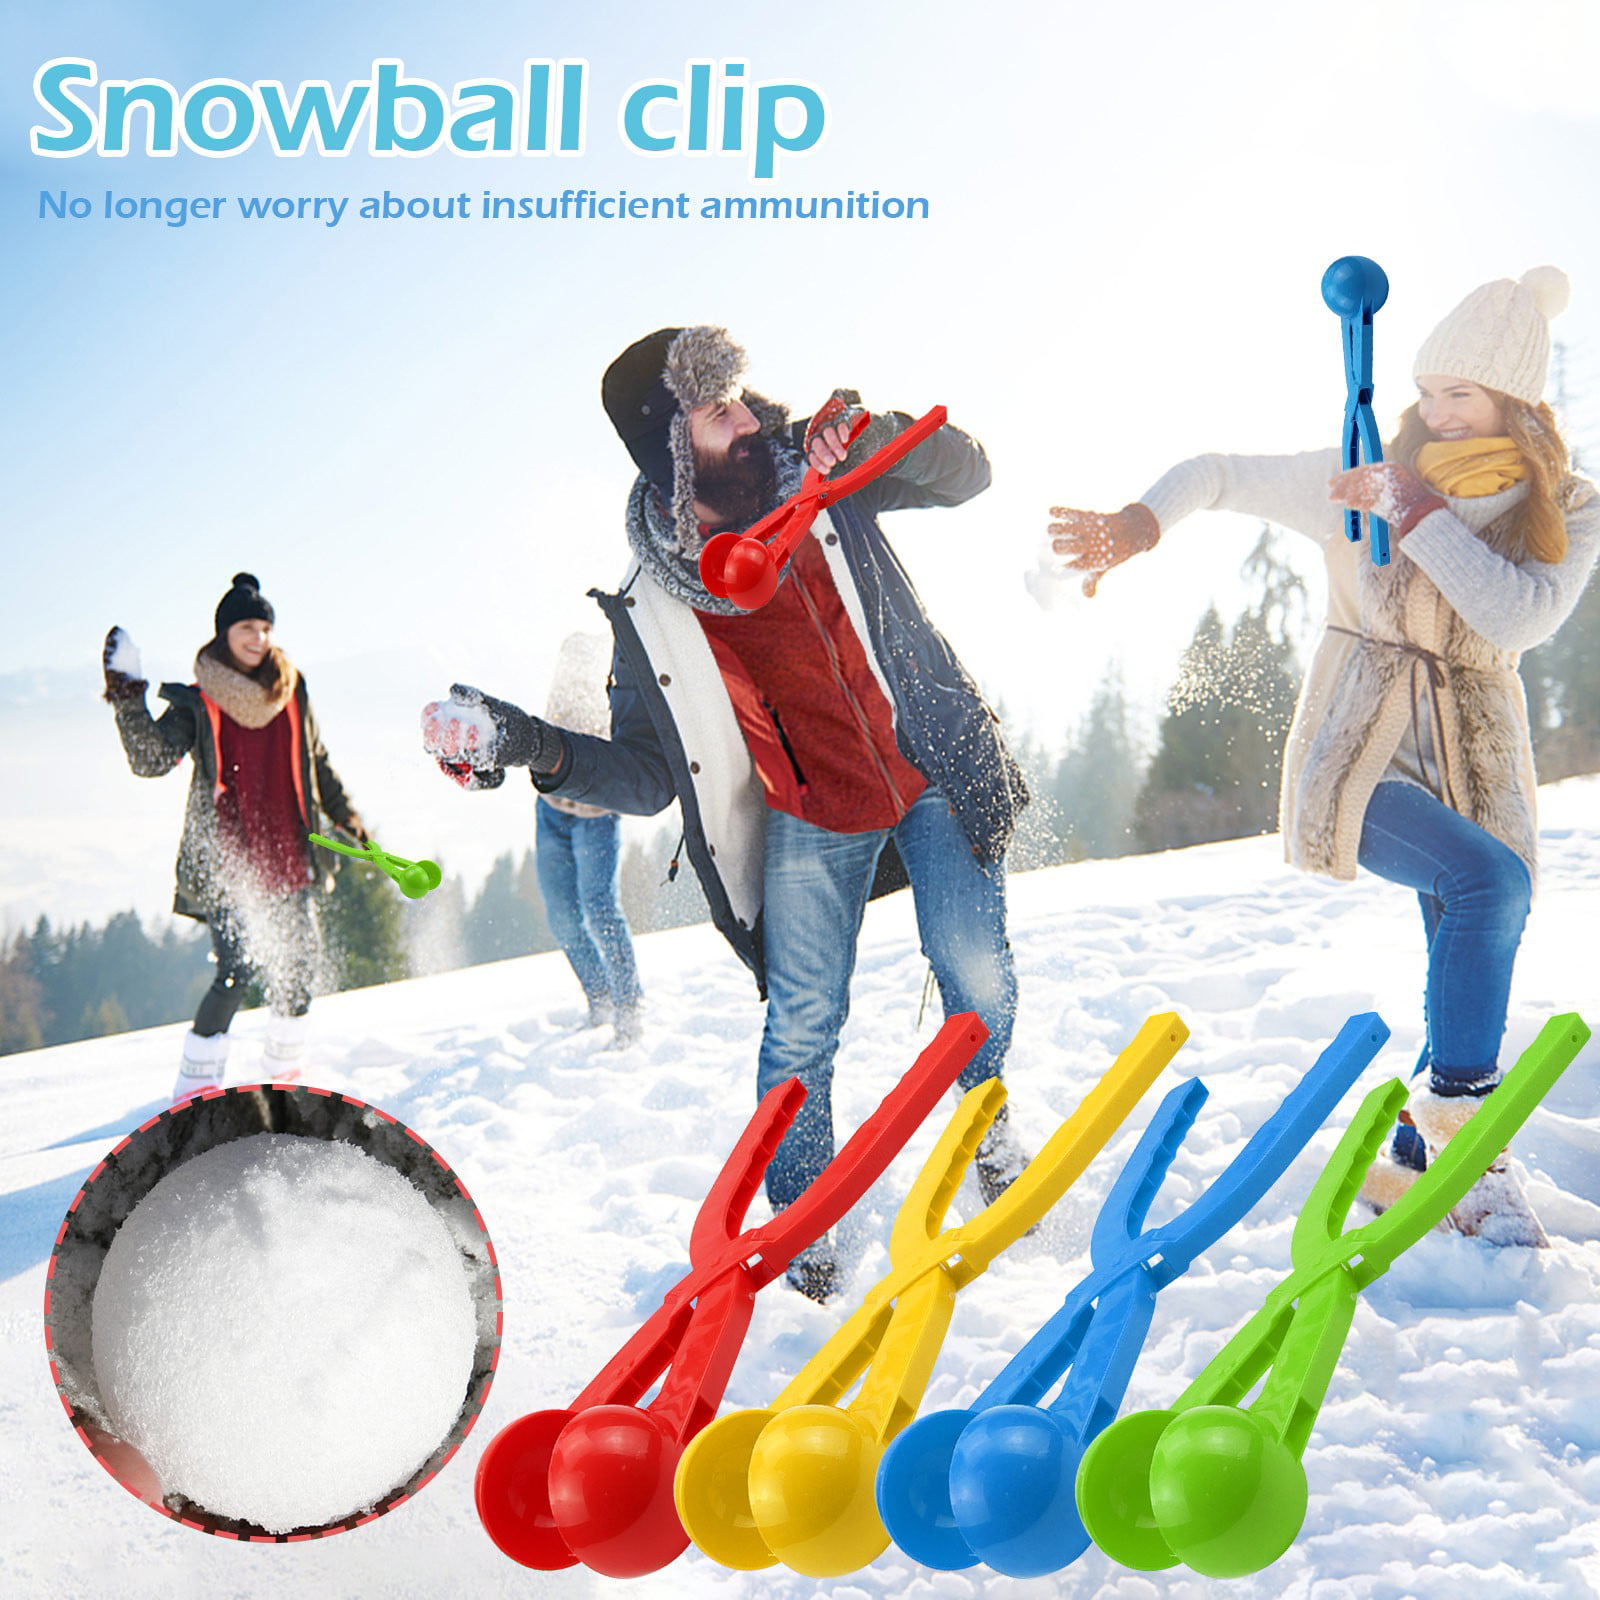 Toyvian 7pcs Snowball Makers Play Snow Game Toys Kids Outdoor Winter Toys  Snowball Making Tools for Adults Kids Snowball Fights